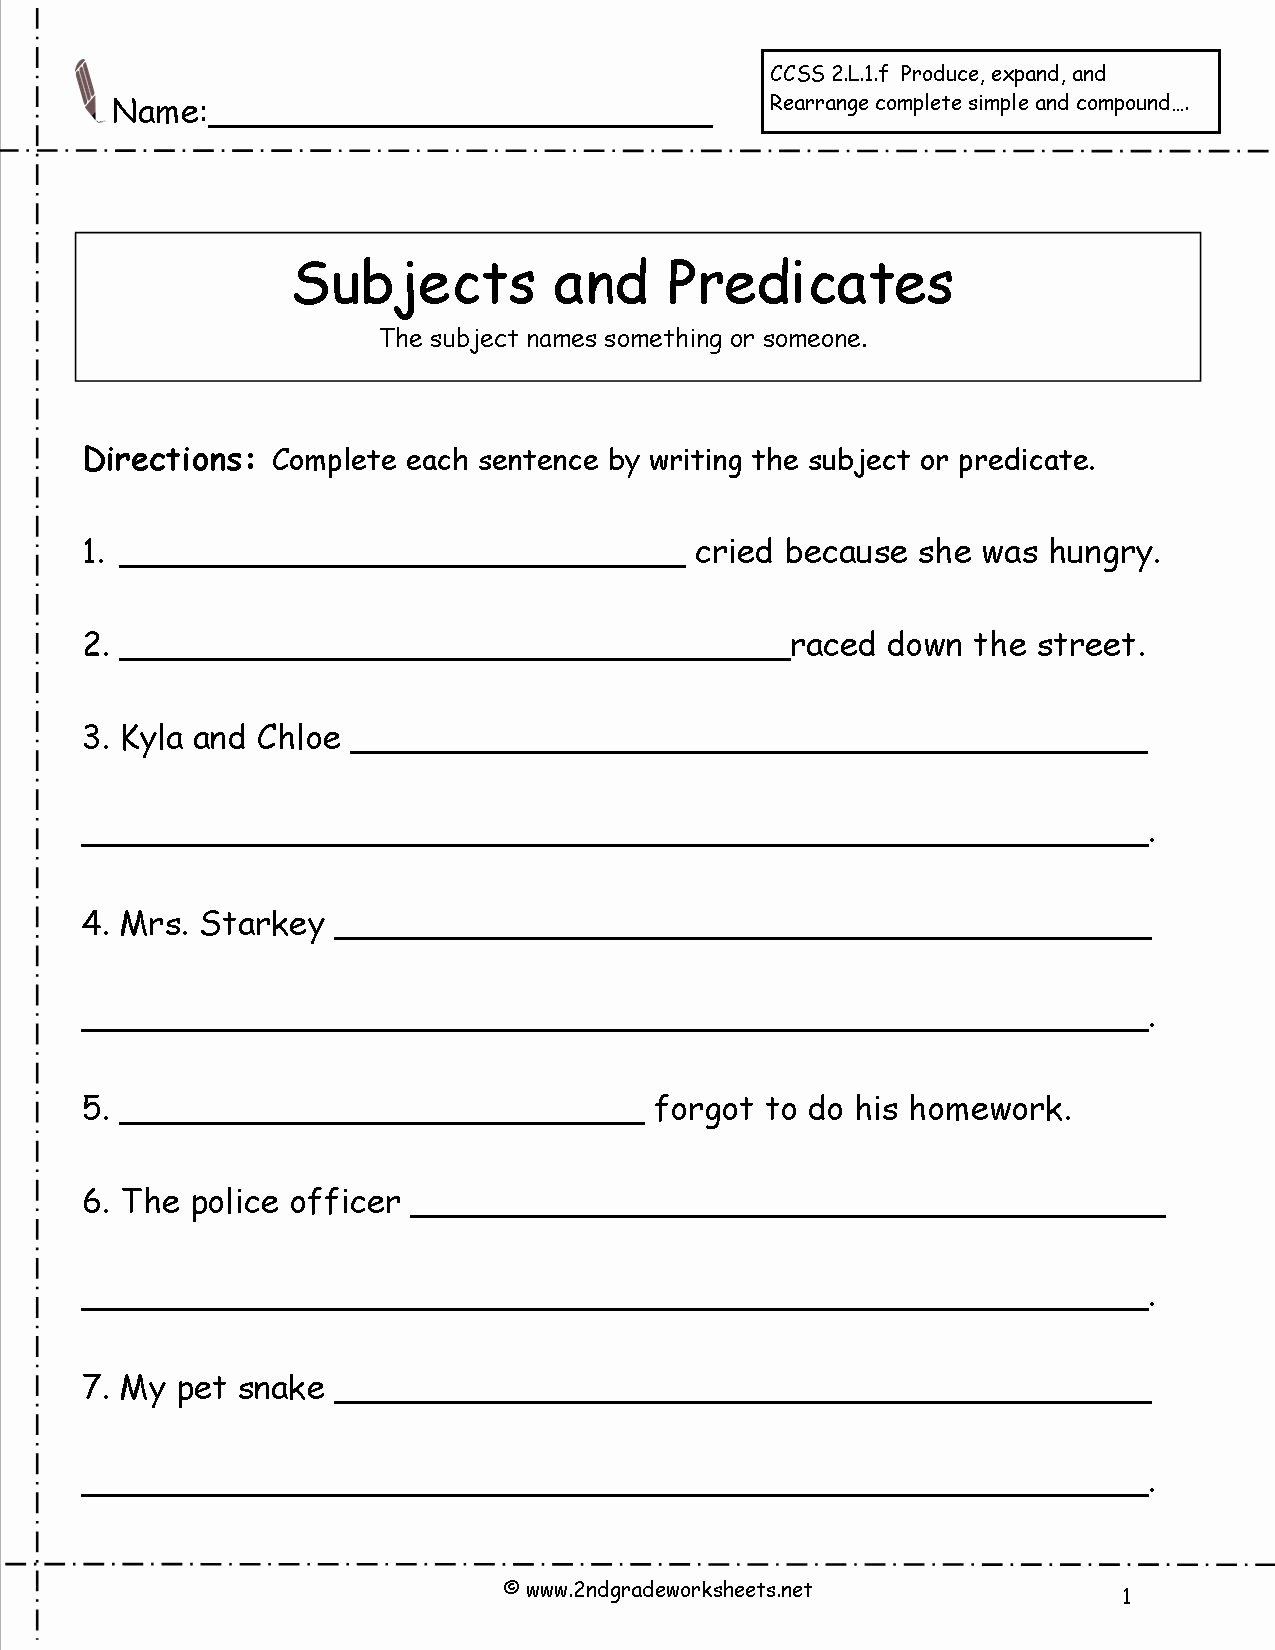 Subjects and Predicates Worksheet New Second Grade Sentences Worksheets Ccss 2 L 1 F Worksheets